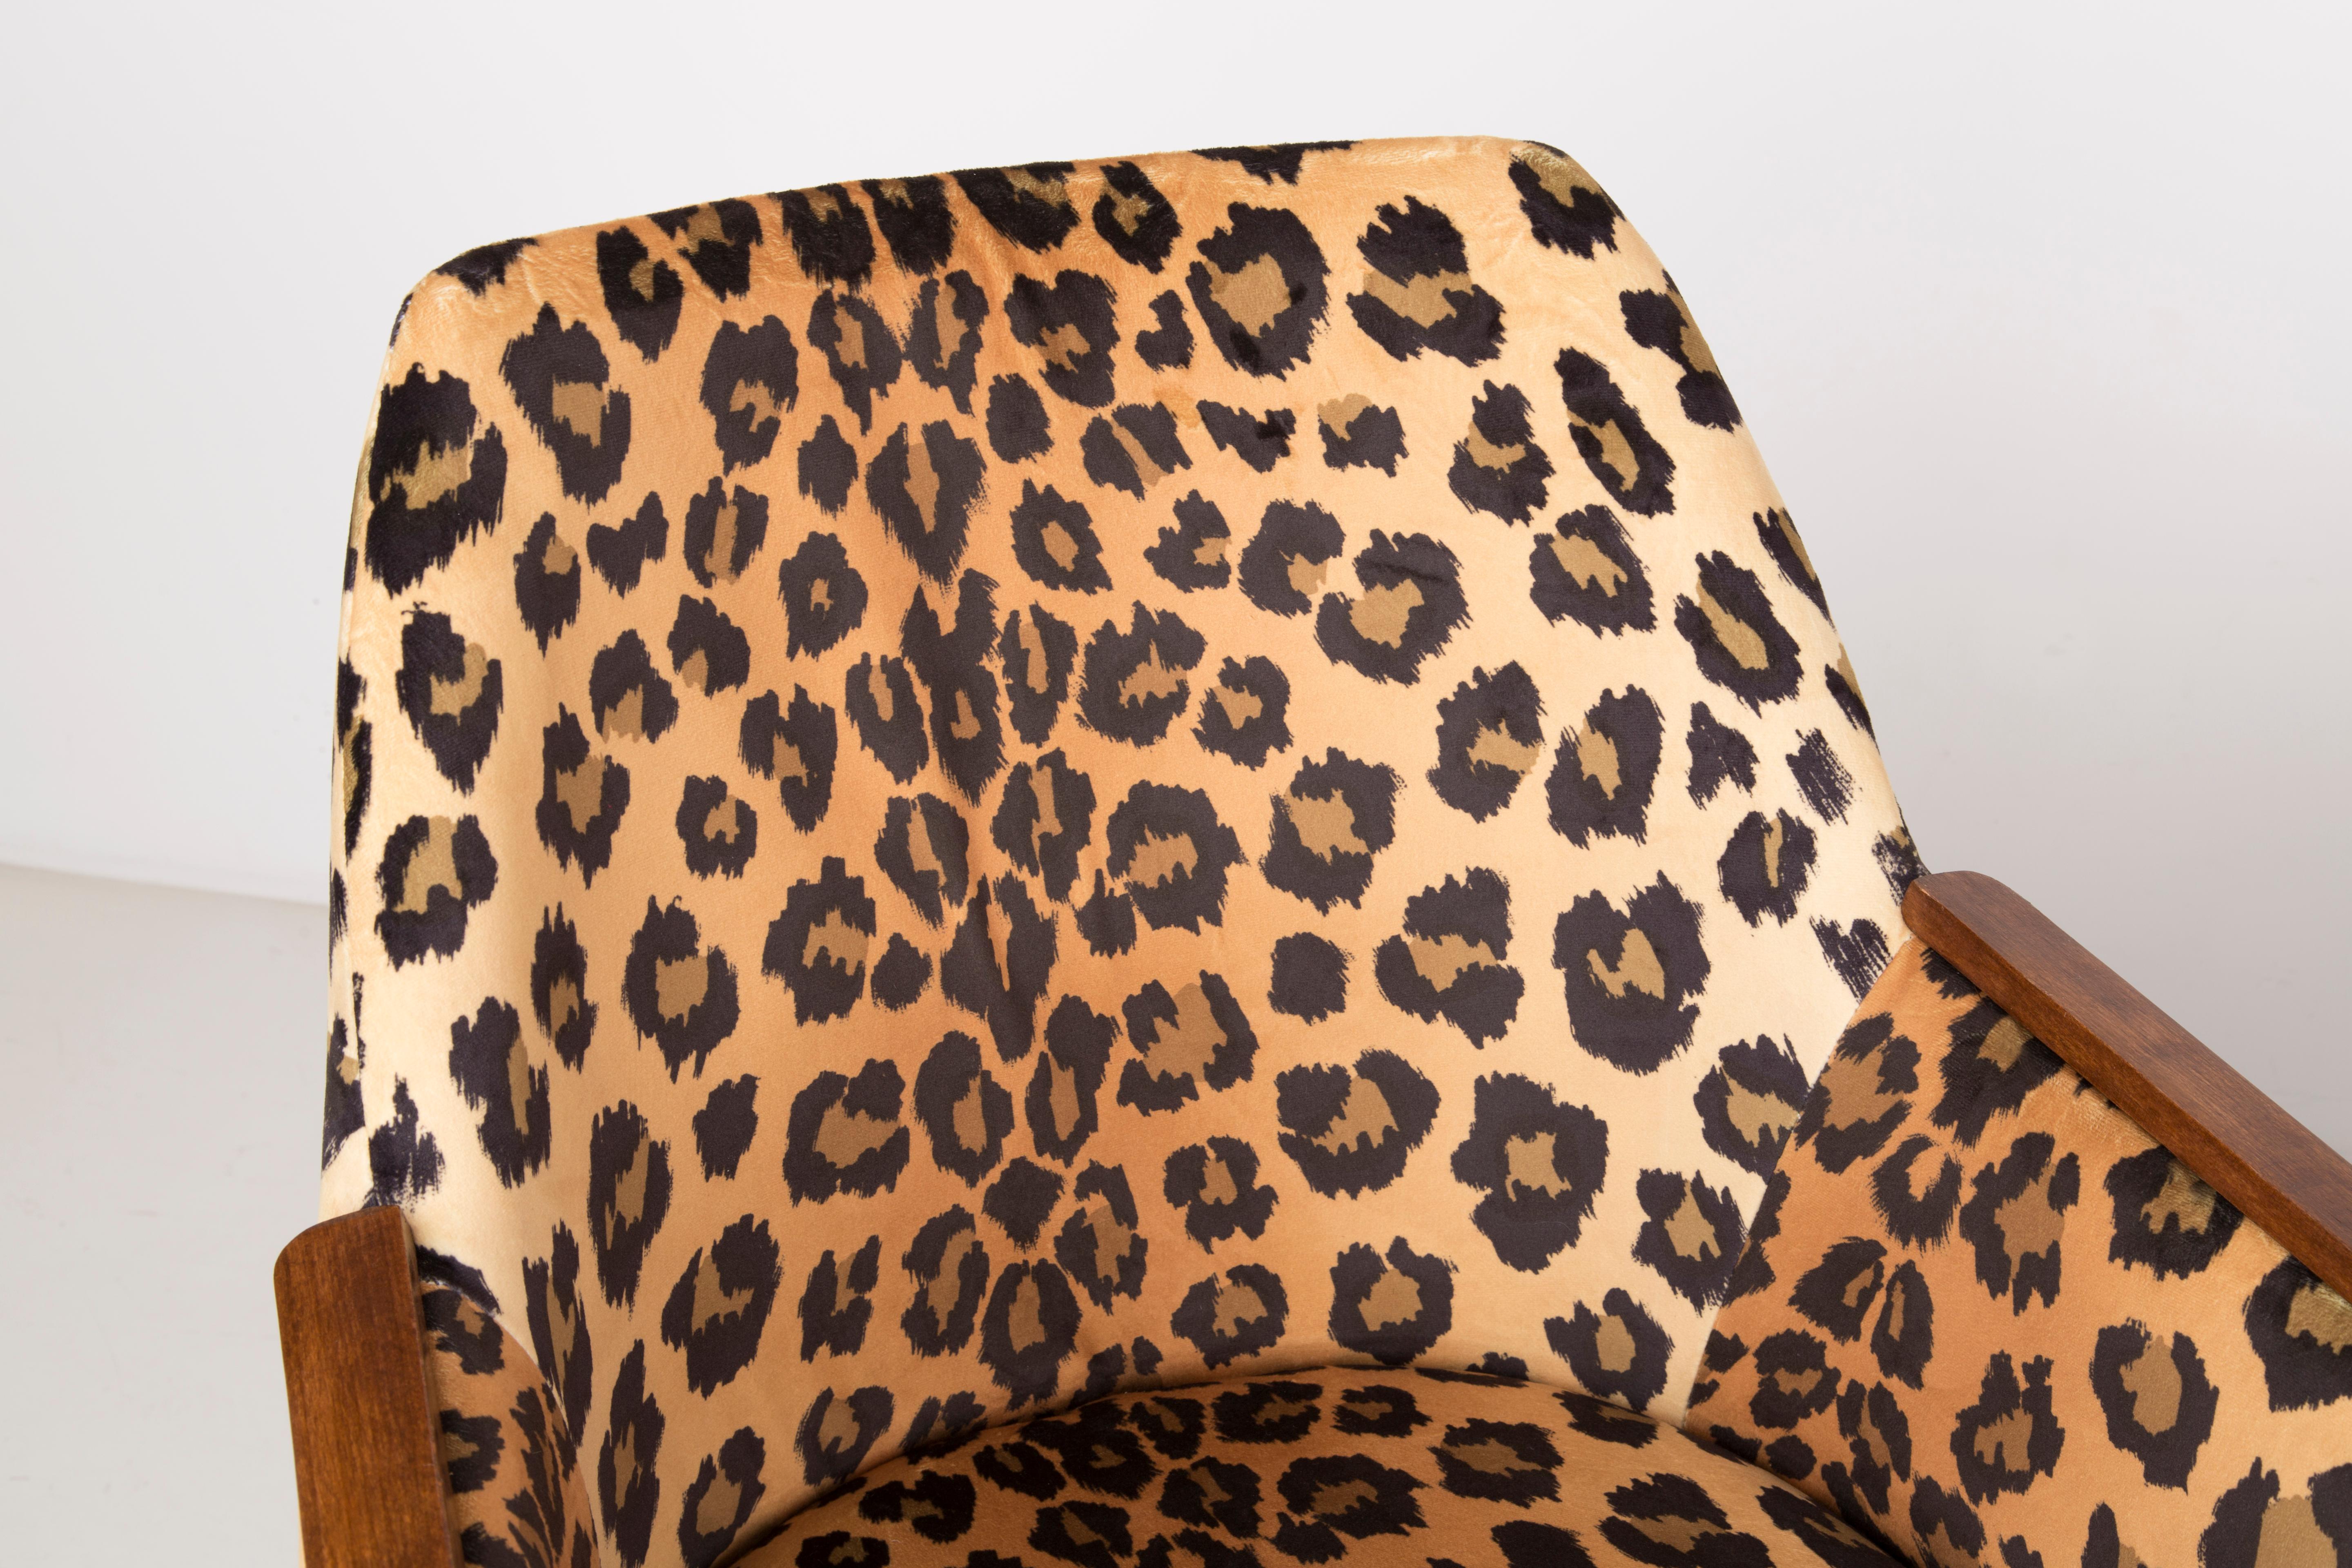 Set of Two Mid-Century Modern Leopard Print Chairs, 1960s, Germany 2